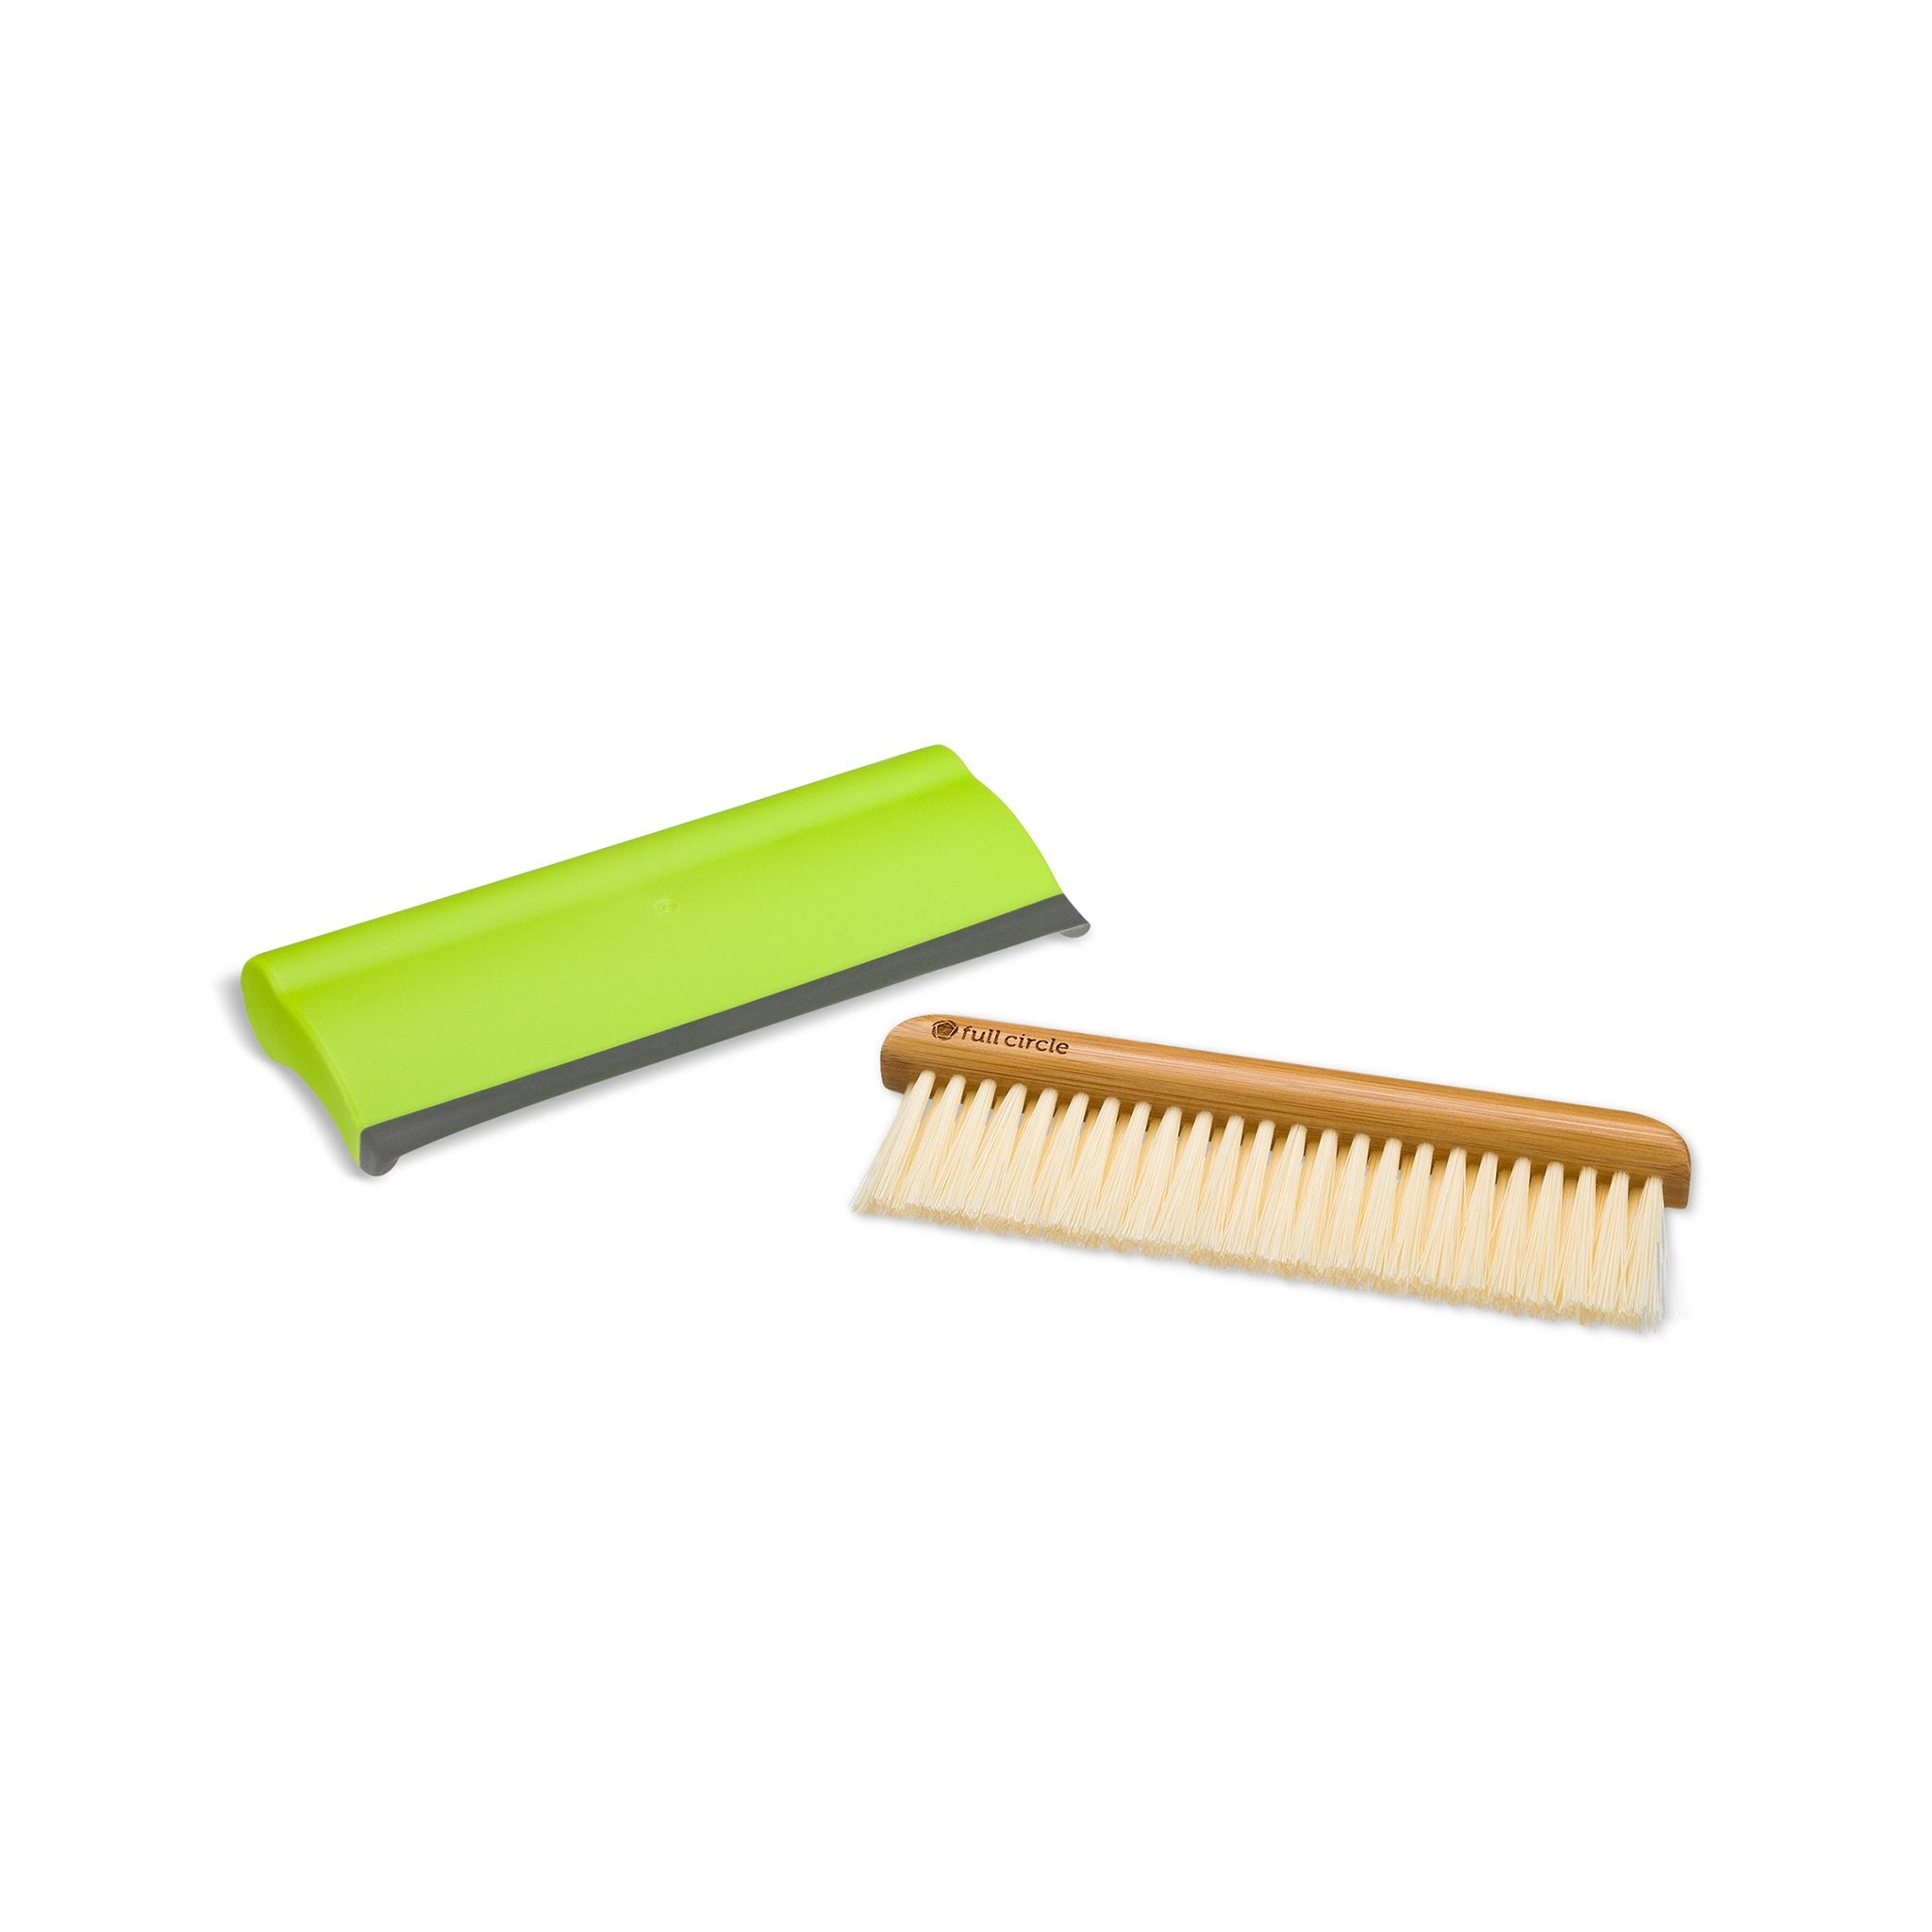 Mini Dustpan, and Squeegee Small Hand Broom Counter Brush Cleaning